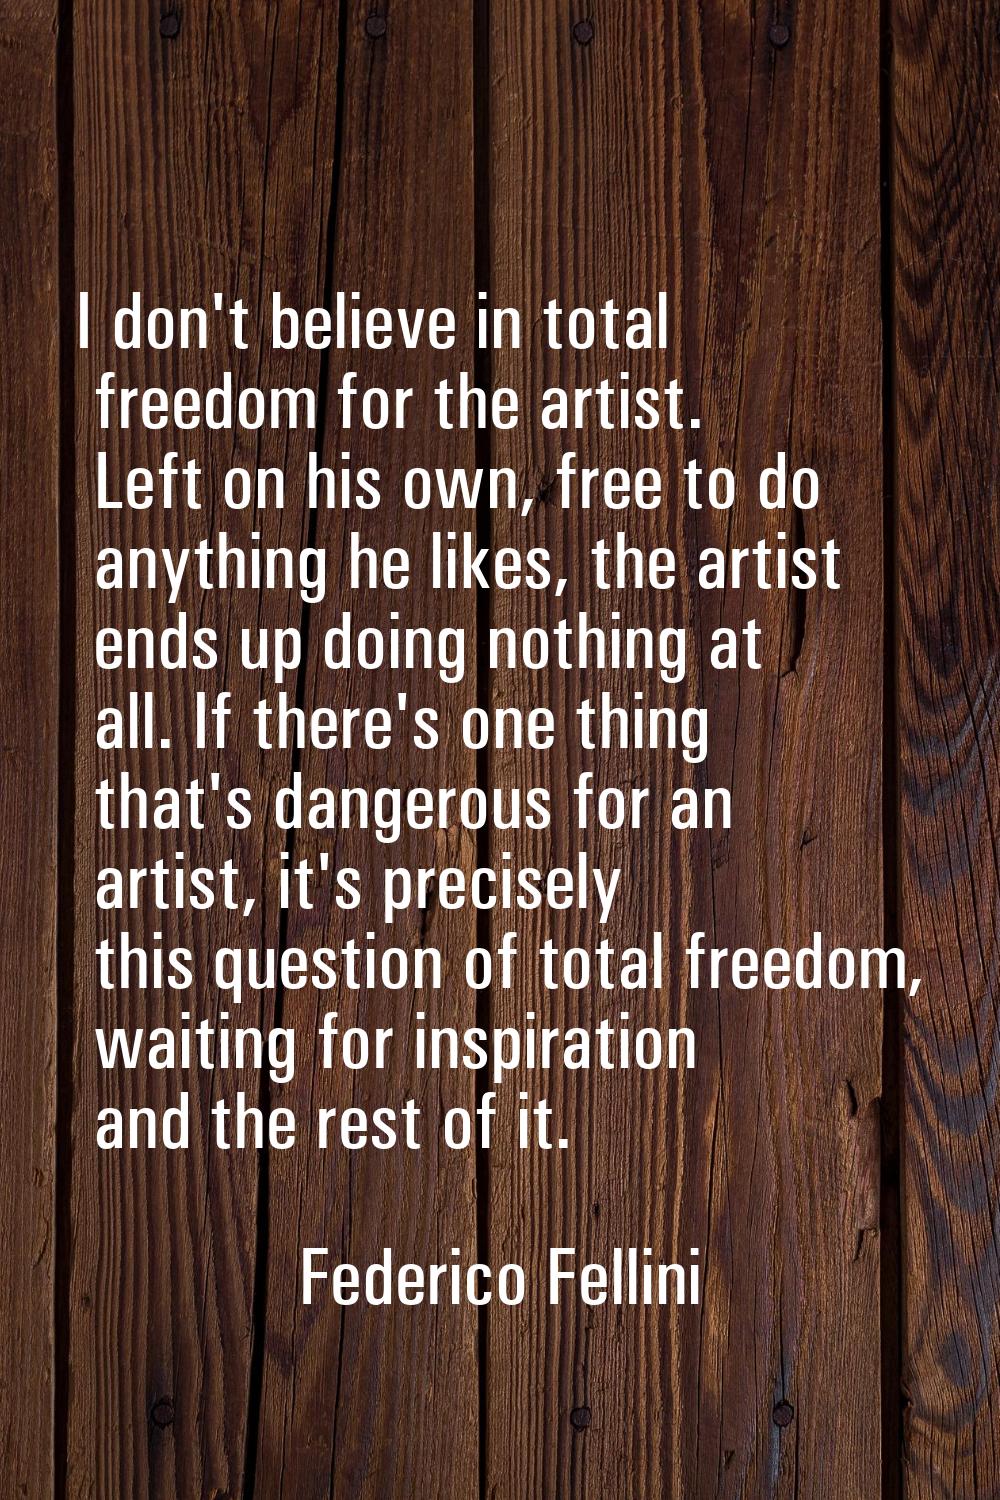 I don't believe in total freedom for the artist. Left on his own, free to do anything he likes, the